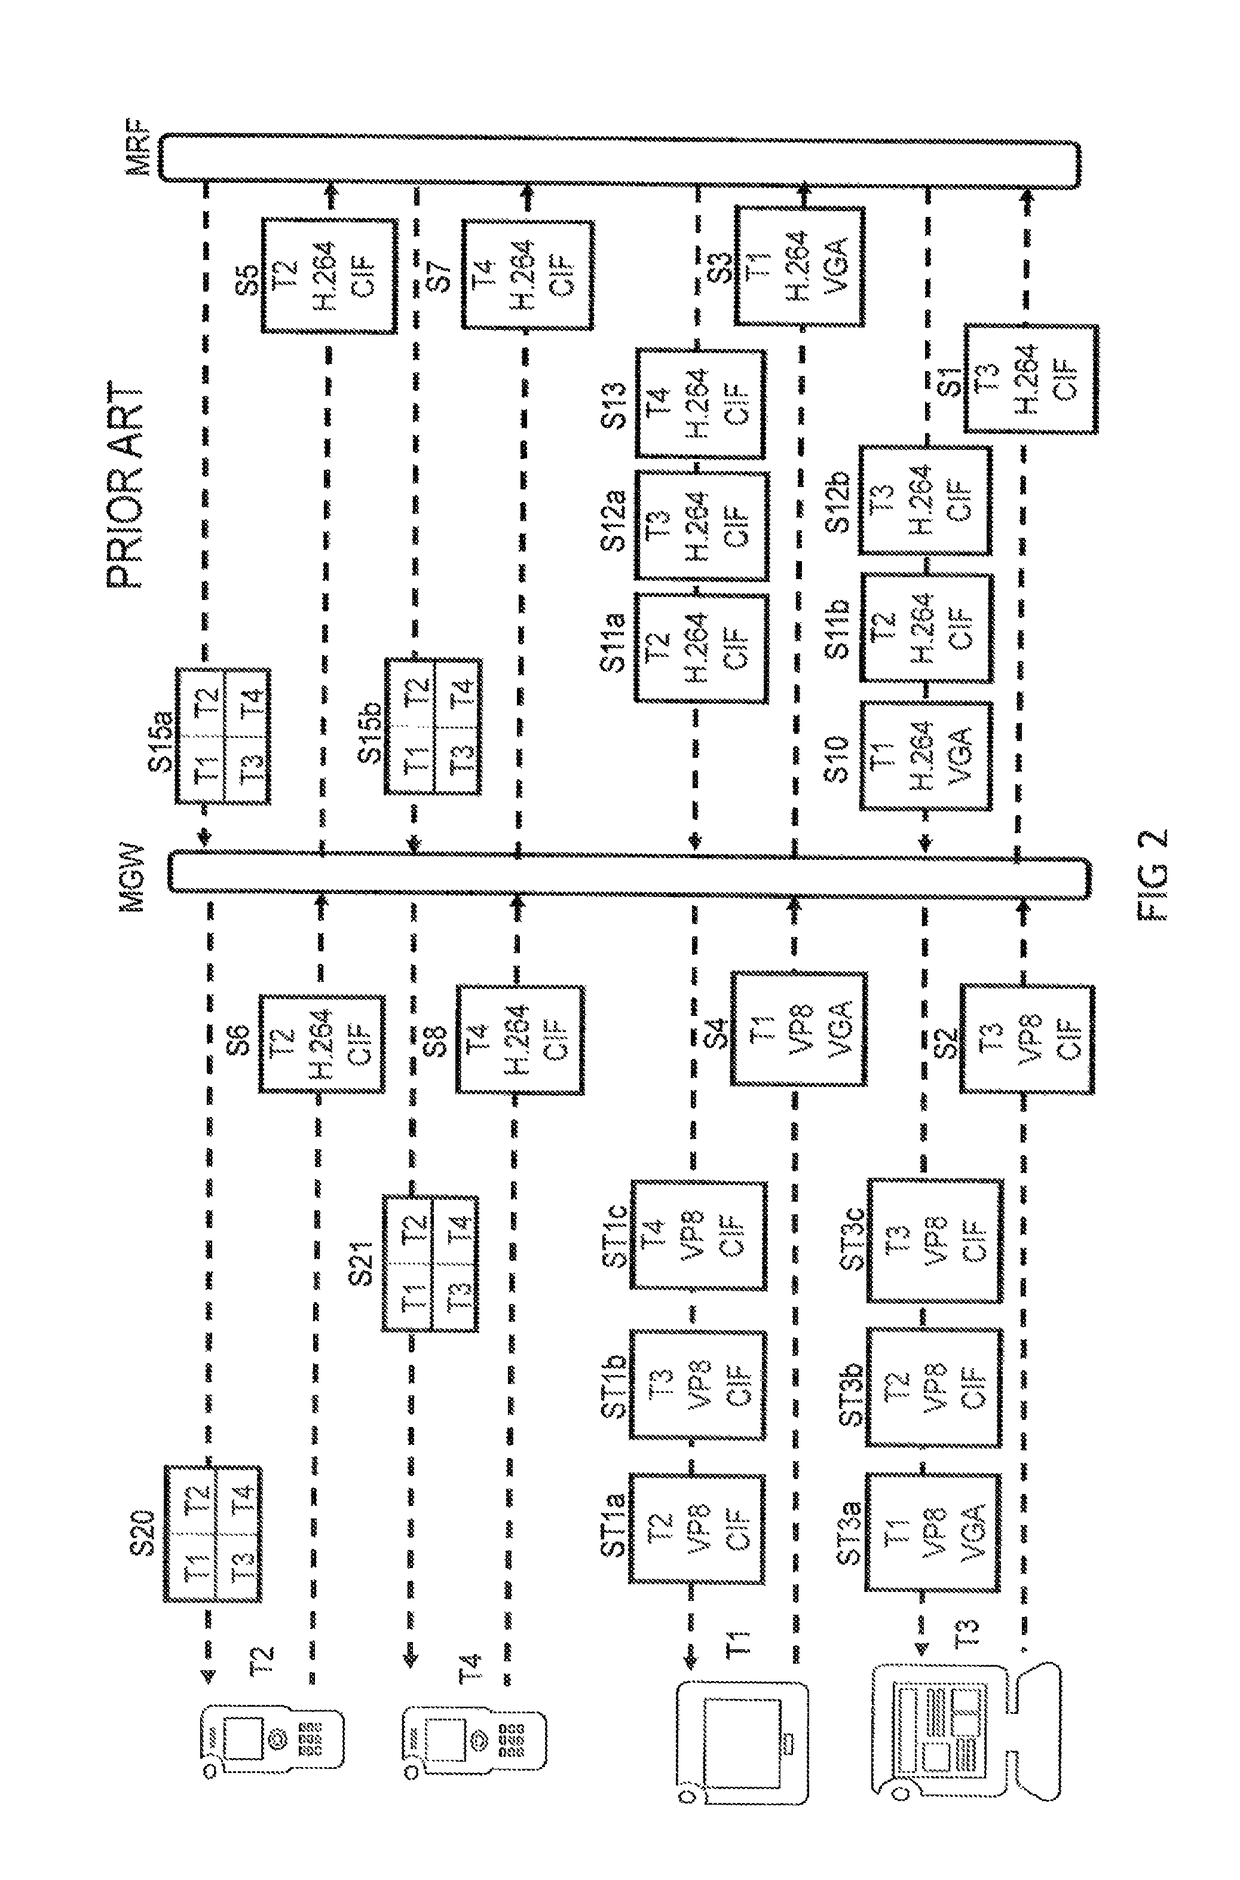 Mediator for optimizing the transmission of media contents between a multimedia resource function and a plurality of terminals